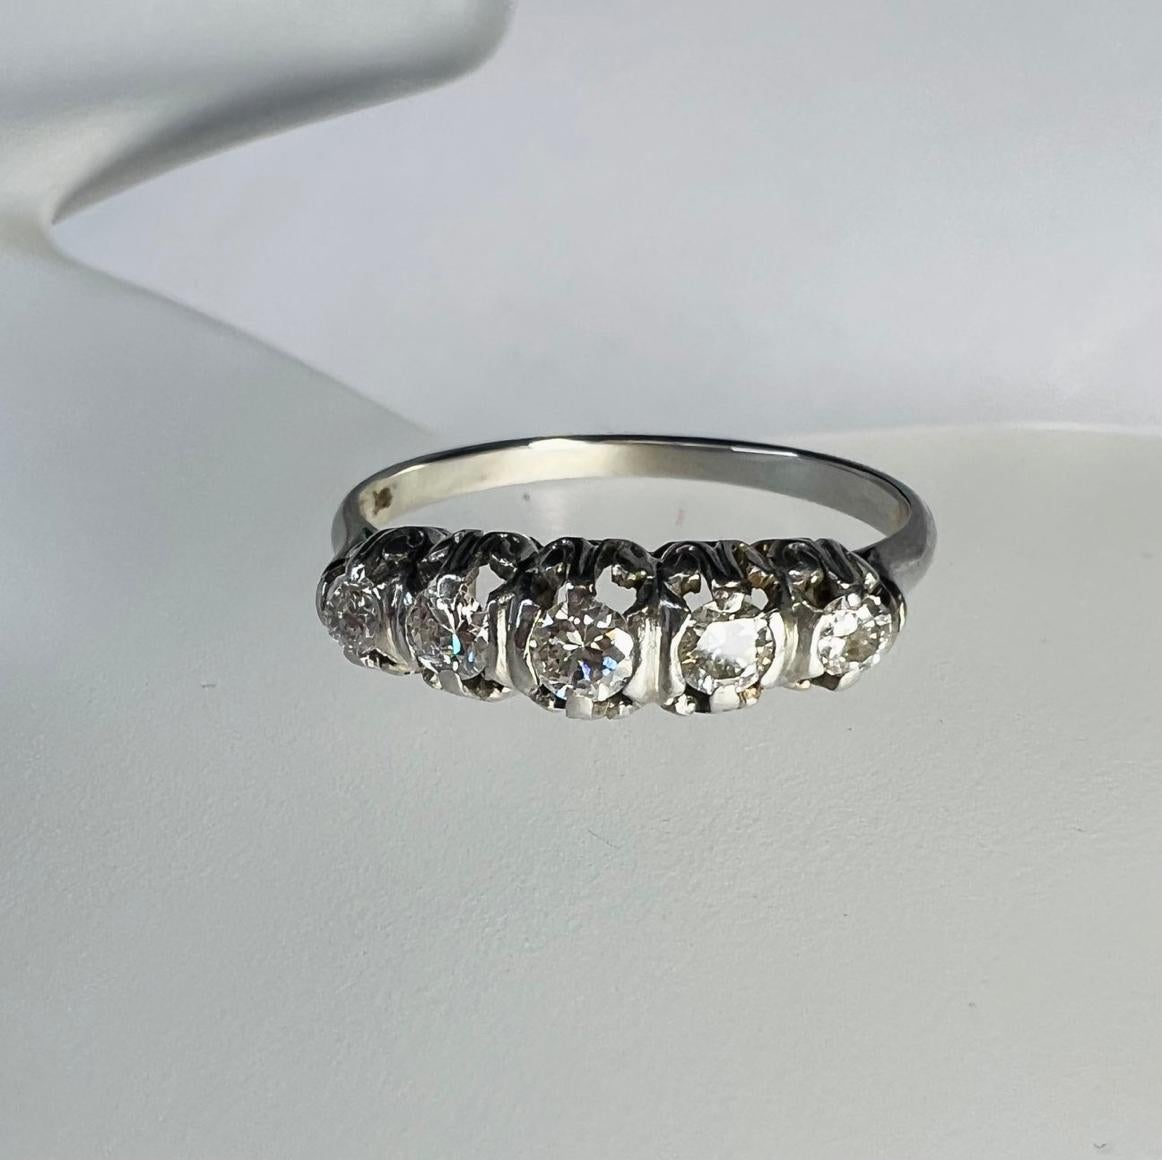 Presenting a,

An EdwardianRing with prong set Diamond on a White gold band.

The Diamonds are natural and earth mined approximately .35ctw

The Ring is 4mm wide, 4mm Rise and 1mm shank

Weight 2.56G

Marked 18K

Ships in a jewelry gift box.